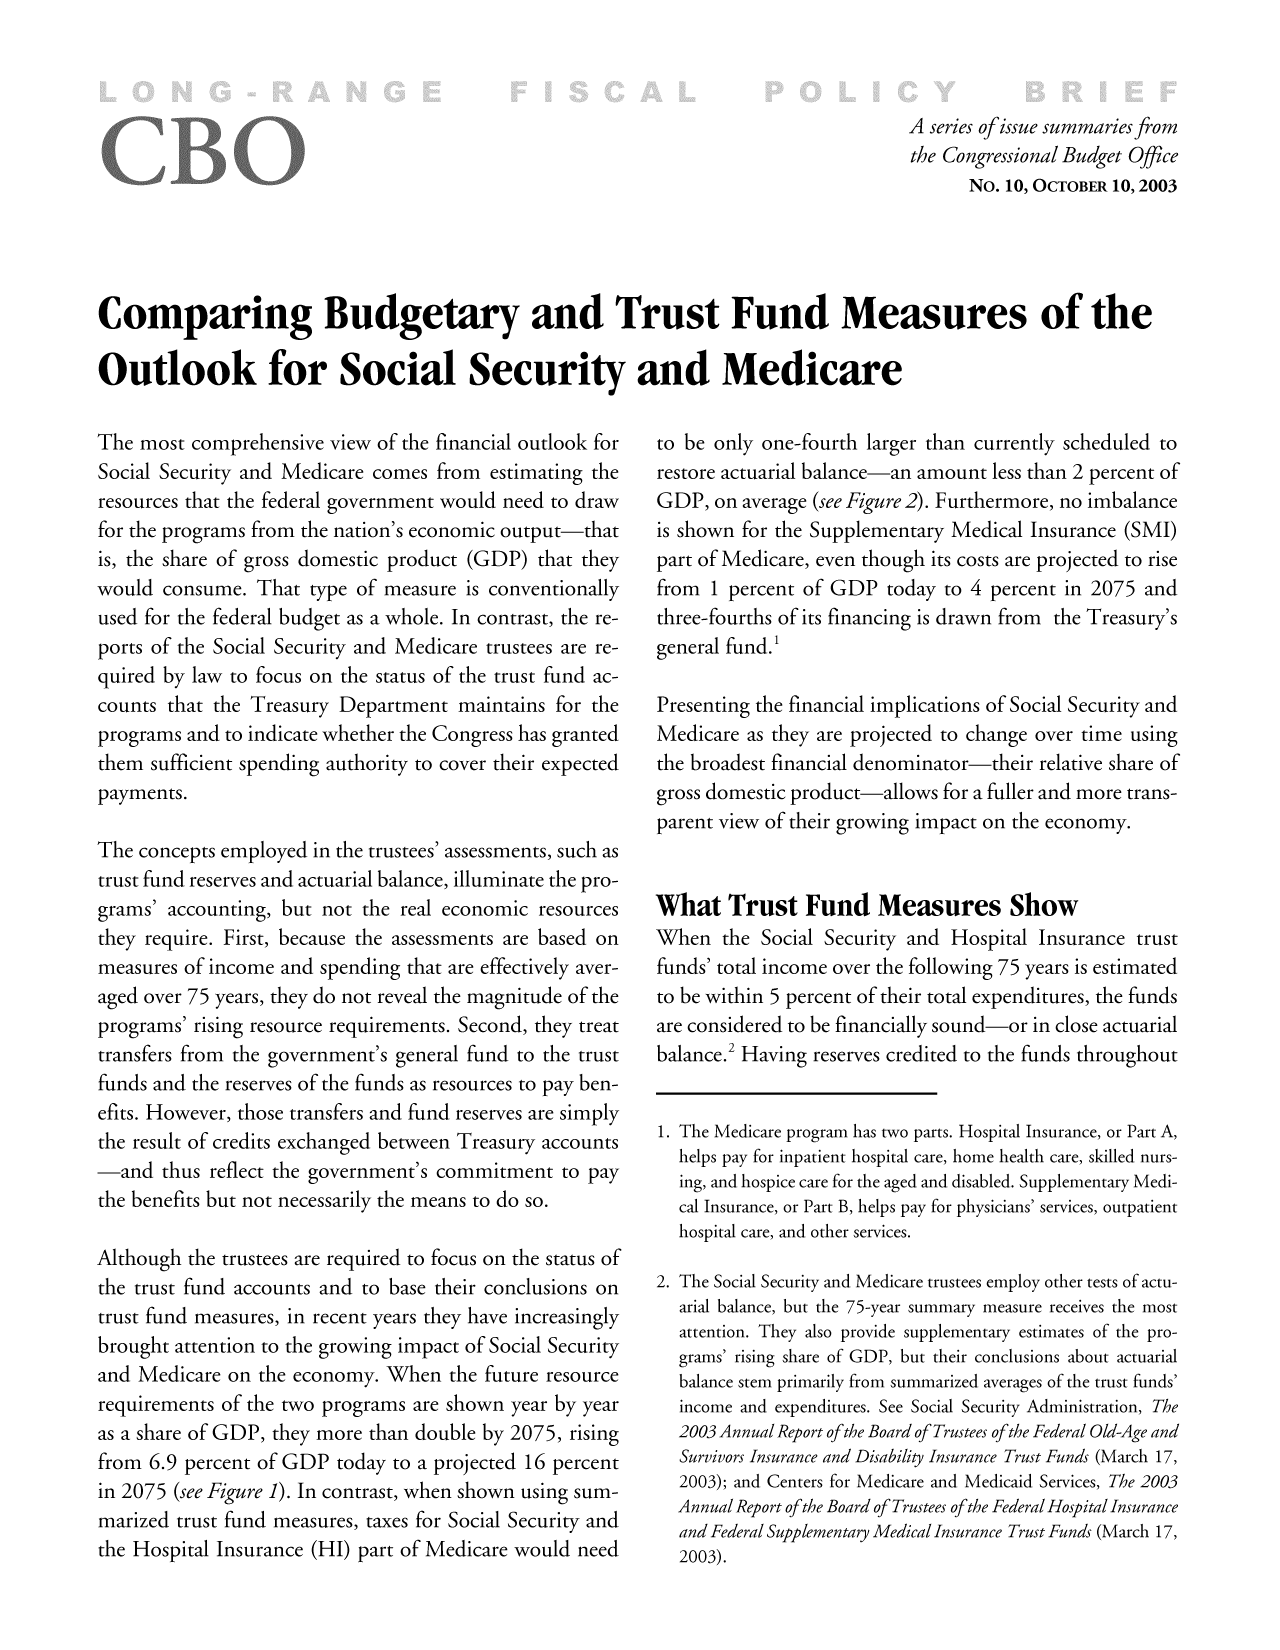 handle is hein.congrec/cbo8311 and id is 1 raw text is: Aseries of issue summaries from
the Congressional Budget Office
No. 10, OCTOBER 10, 2003
Comparing Budgetary and Trust Fund Measures of the
Outlook for Soci'al Security and Medicare

The most comprehensive view of the financial outlook for
Social Security and Medicare comes from estimating the
resources that the federal government would need to draw
for the programs from the nation's economic output-that
is, the share of gross domestic product (GDP) that they
would consume. That type of measure is conventionally
used for the federal budget as a whole. In contrast, the re-
ports of the Social Security and Medicare trustees are re-
quired by law to focus on the status of the trust fund ac-
counts that the Treasury Department maintains for the
programs and to indicate whether the Congress has granted
them sufficient spending authority to cover their expected
payments.
The concepts employed in the trustees' assessments, such as
trust fund reserves and actuarial balance, illuminate the pro-
grams' accounting, but not the real economic resources
they require. First, because the assessments are based on
measures of income and spending that are effectively aver-
aged over 75 years, they do not reveal the magnitude of the
programs' rising resource requirements. Second, they treat
transfers from the government's general fund to the trust
funds and the reserves of the funds as resources to pay ben-
efits. However, those transfers and fund reserves are simply
the result of credits exchanged between Treasury accounts
-and thus reflect the government's commitment to pay
the benefits but not necessarily the means to do so.
Although the trustees are required to focus on the status of
the trust fund accounts and to base their conclusions on
trust fund measures, in recent years they have increasingly
brought attention to the growing impact of Social Security
and Medicare on the economy. When the future resource
requirements of the two programs are shown year by year
as a share of GDP, they more than double by 2075, rising
from 6.9 percent of GDP today to a projected 16 percent
in 2075 (see Figure 1). In contrast, when shown using sum-
marized trust fund measures, taxes for Social Security and
th Hopta Inurance-HI) rtofMed-IcarewoulInee

to be only one-fourth larger than currently scheduled to
restore actuarial balance-an amount less than 2 percent of
GDP, on average (see Figure 2). Furthermore, no imbalance
is shown for the Supplementary Medical Insurance (SMI)
part of Medicare, even though its costs are projected to rise
from 1 percent of GDP today to 4 percent in 2075 and
three-fourths of its financing is drawn from   the Treasury')s
general fund.'
Presenting the financial implications of Social Security and
Medicare as they are projected to change over time using
the broadest financial denominator-their relative share of
gross domestic product-allows for a fuller and more trans-
parent view of their growing impact on the economy.
What Trust Fund Measures Show
When the Social Security and Hospital Insurance trust
funds' total income over the following 75 years is estimated
to be within 5 percent of their total expenditures, the funds
are considered to be financially sound-or in close actuarial
balance.2 Having reserves credited to the funds throughout
1. The Medicare program has two parts. Hospital Insurance, or Part A,
helps pay for inpatient hospital care, home health care, skilled nurs-
ing, and hospice care for the aged and disabled. Supplementary Medi-
cal Insurance, or Part B, helps pay for physicians' services, outpatient
hospital care, and other services.
2. The Social Security and Medicare trustees employ other tests of actu-
arial balance, but the 75-year summary measure receives the most
attention. They also provide supplementary estimates of the pro-
grams' rising share of GDP, but their conclusions about actuarial
balance stem primarily from summarized averages of the trust funds'
income and expenditures. See Social Security Administration, The
2003 Annual Report of the Board of Trustees of the Federal Old-Age and
Survivors Insurance and Disability Insurance Trust Funds (March 17,
2003); and Centers for Medicare and Medicaid Services, The 2003
Annual Report of the Board of Trustees of the Federal Hosp ital Insurance
and Federal Supplementary Medical Insurance Trust Funds (March 17,


